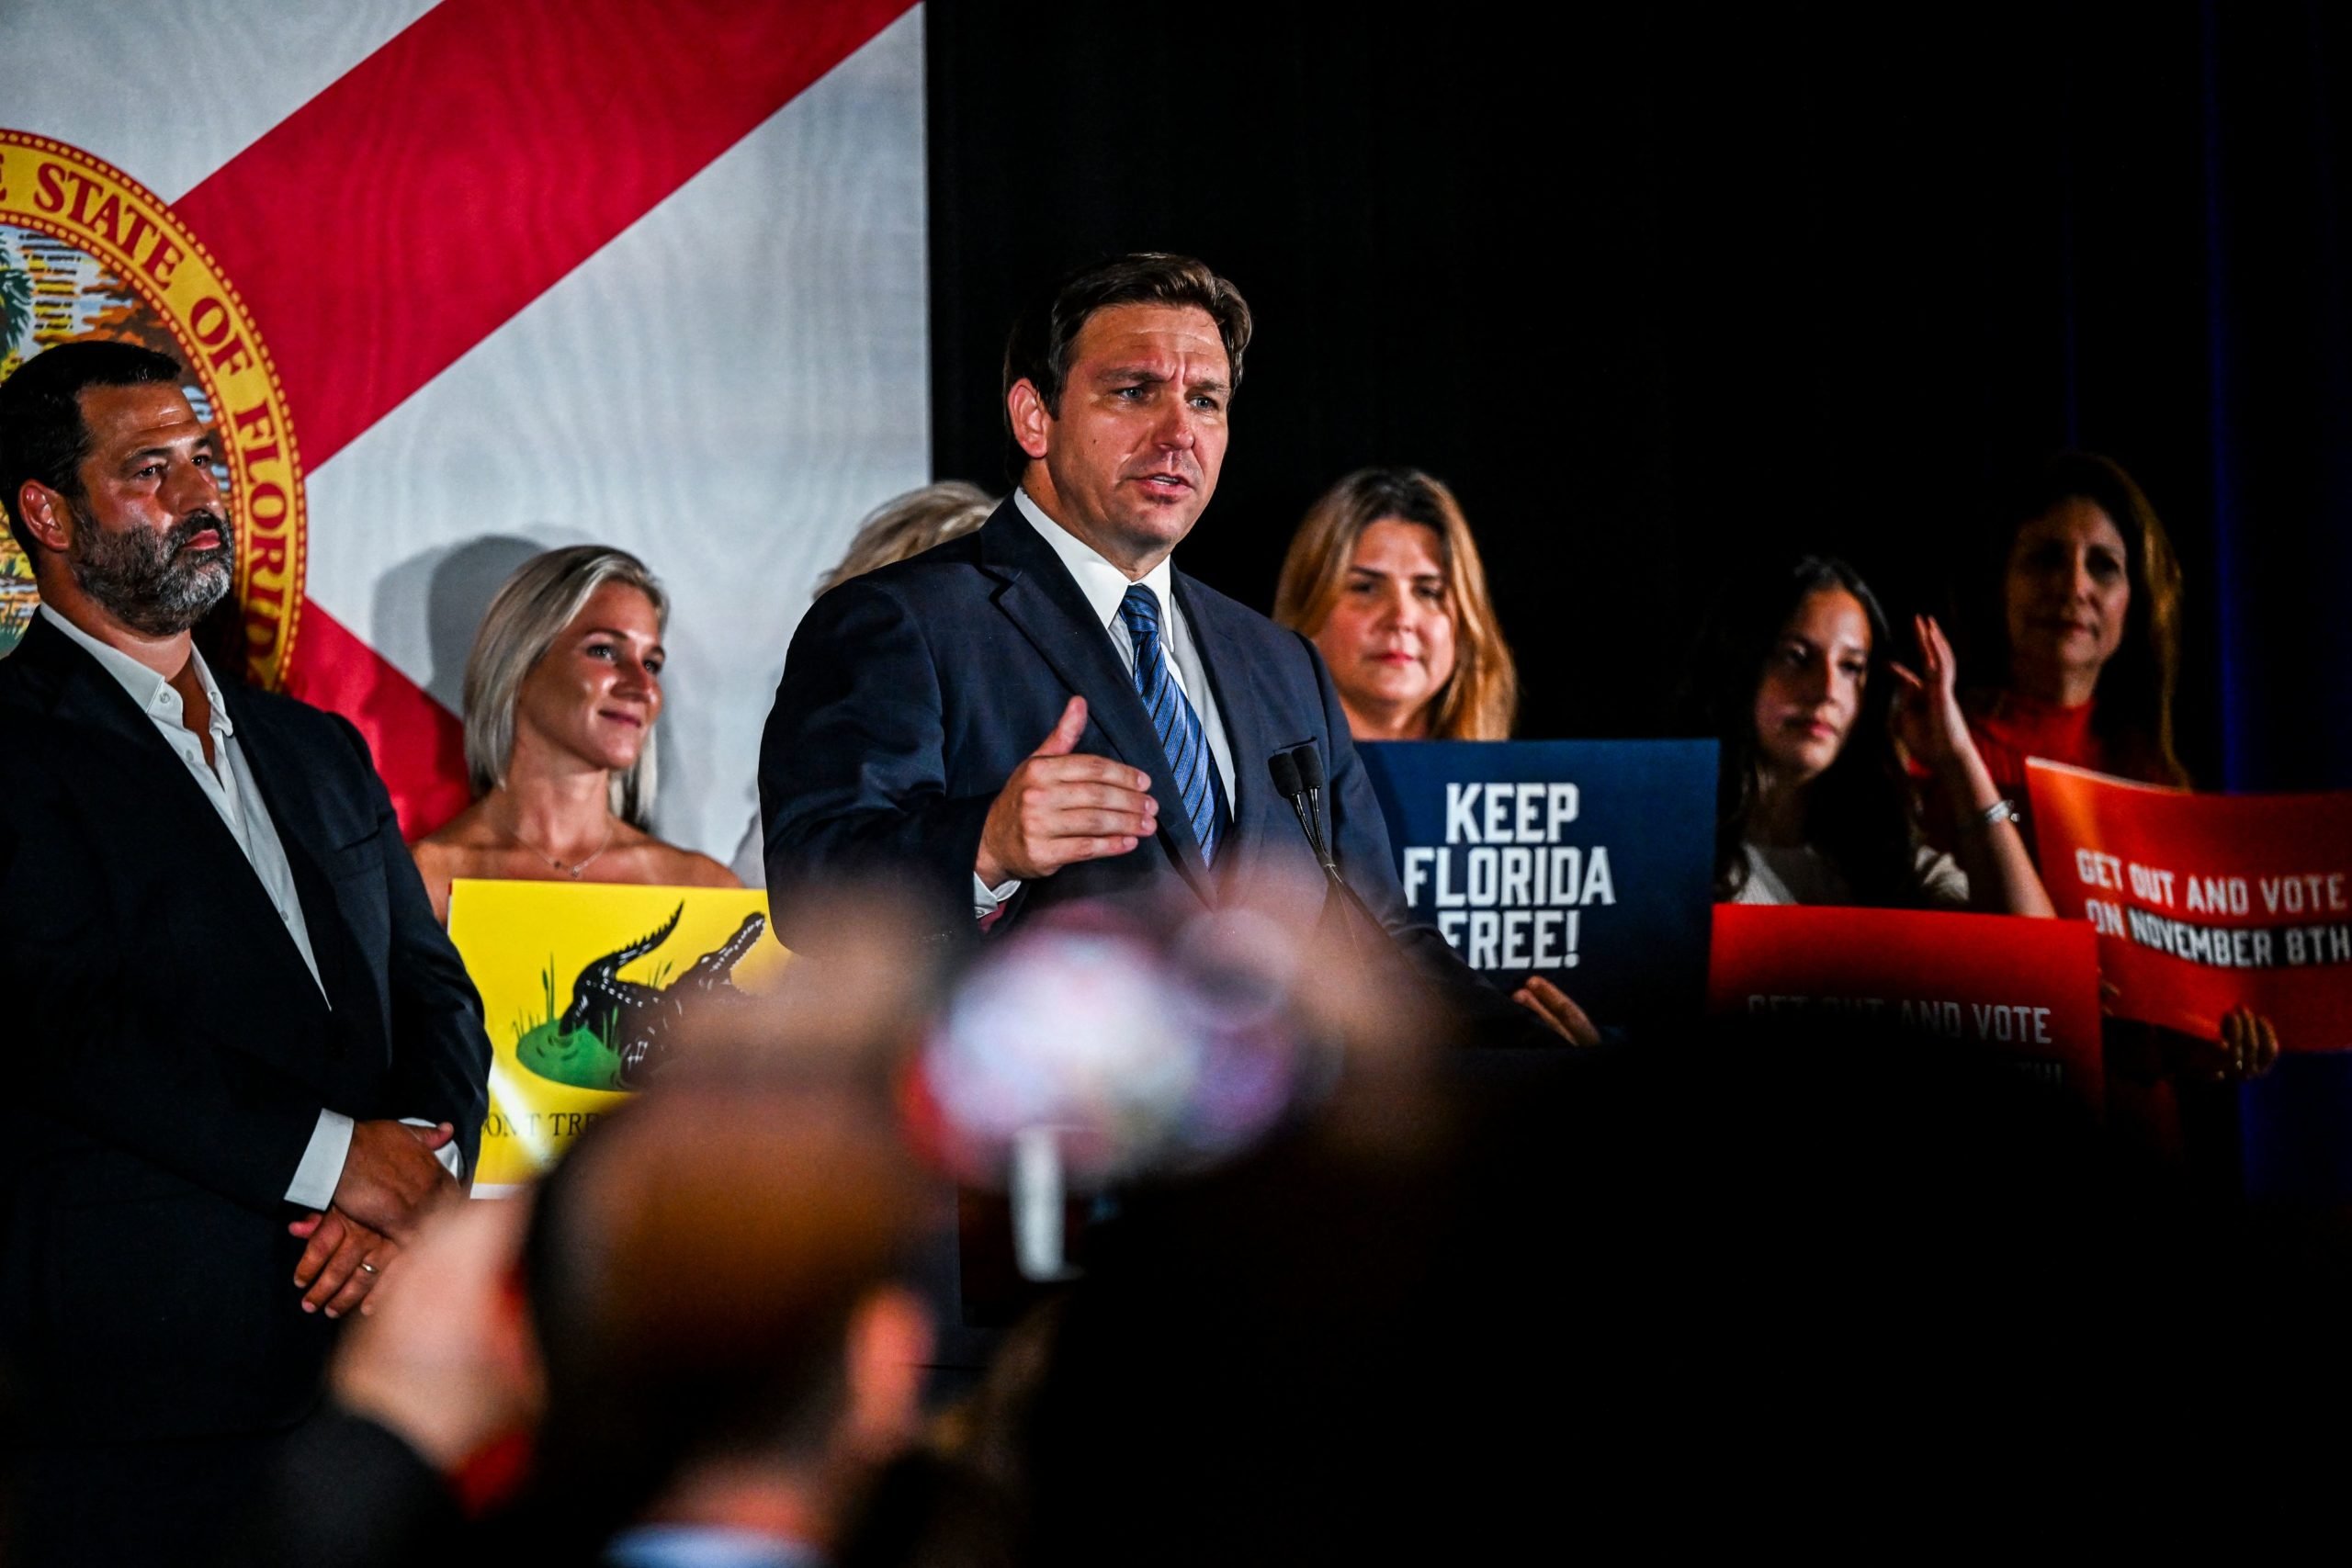 Florida Governor Ron DeSantis (C) speaks during a primary election night event in Hialeah, Florida, on August 23, 2022. - DeSantis will face US Representative Charlie Crist (D-FL) in the general election for governor of Florida on November 8, 2022. (Photo by CHANDAN KHANNA / AFP) (Photo by CHANDAN KHANNA/AFP via Getty Images)